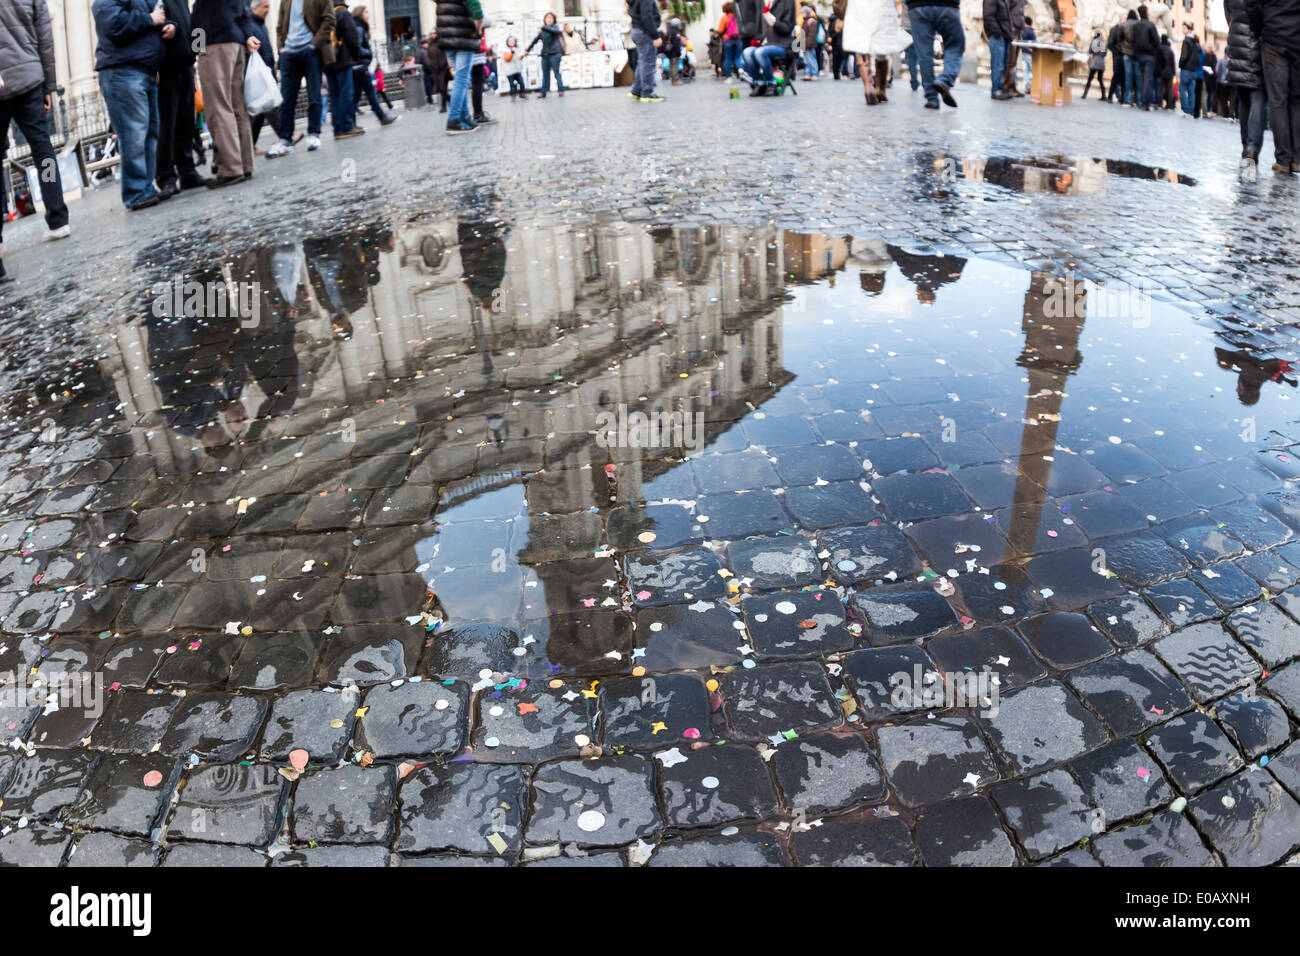 Italy, Rome, Piazza Navona, Church Sant Agnese in Agone reflecting in puddle Stock Photo